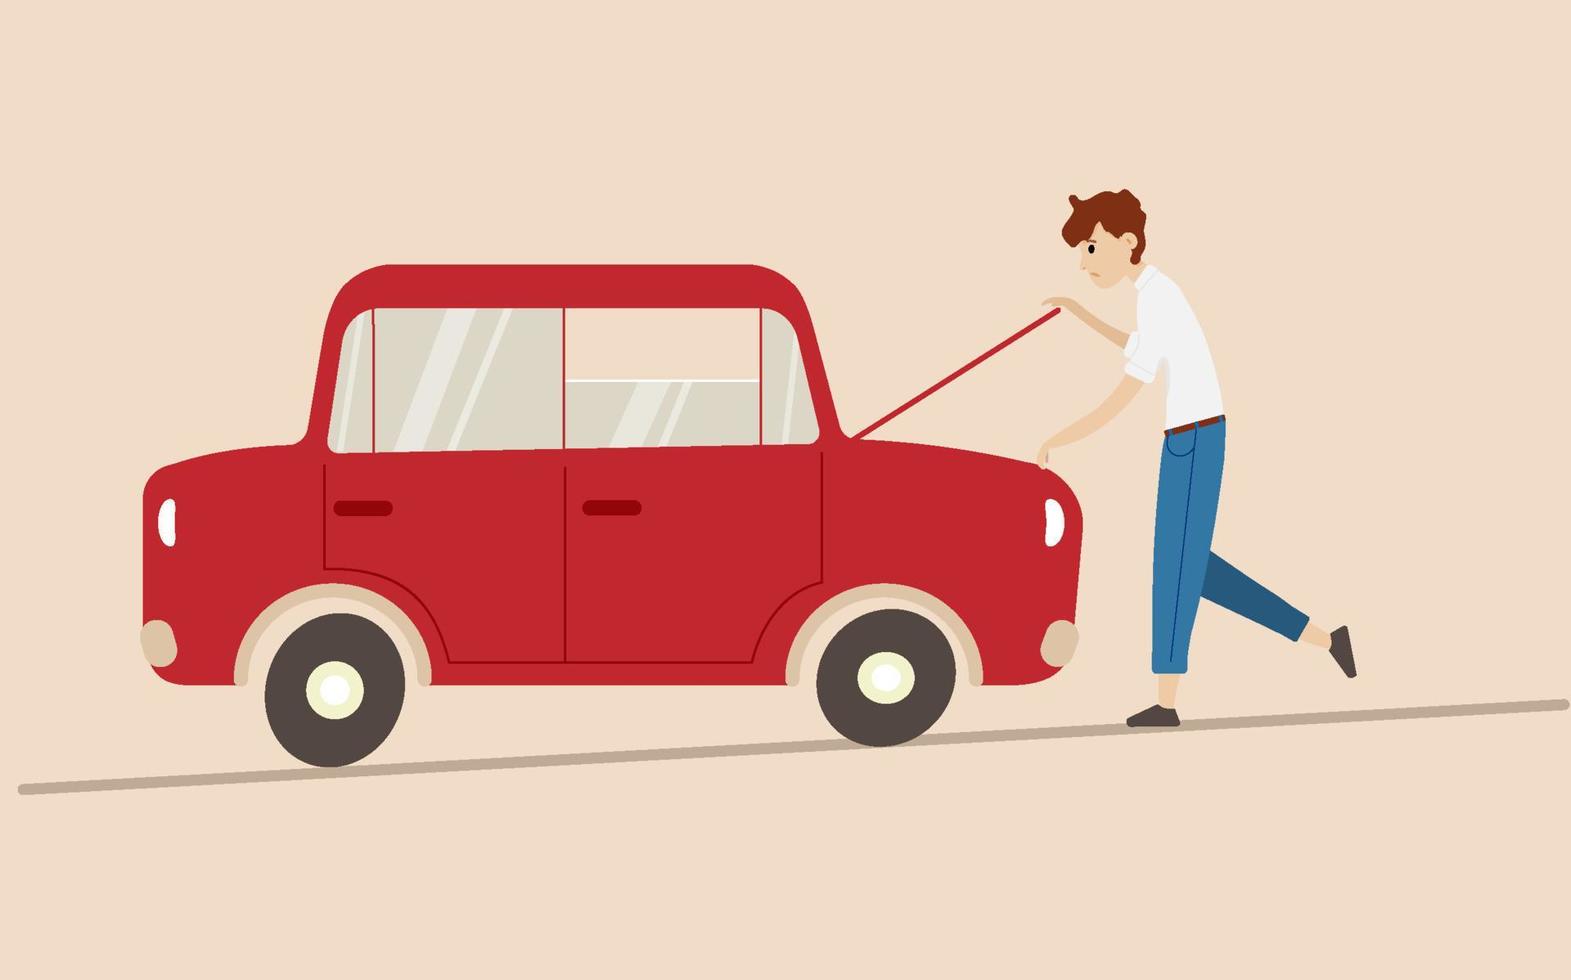 Red old car broke down, young driver is repairing. Vector illustration